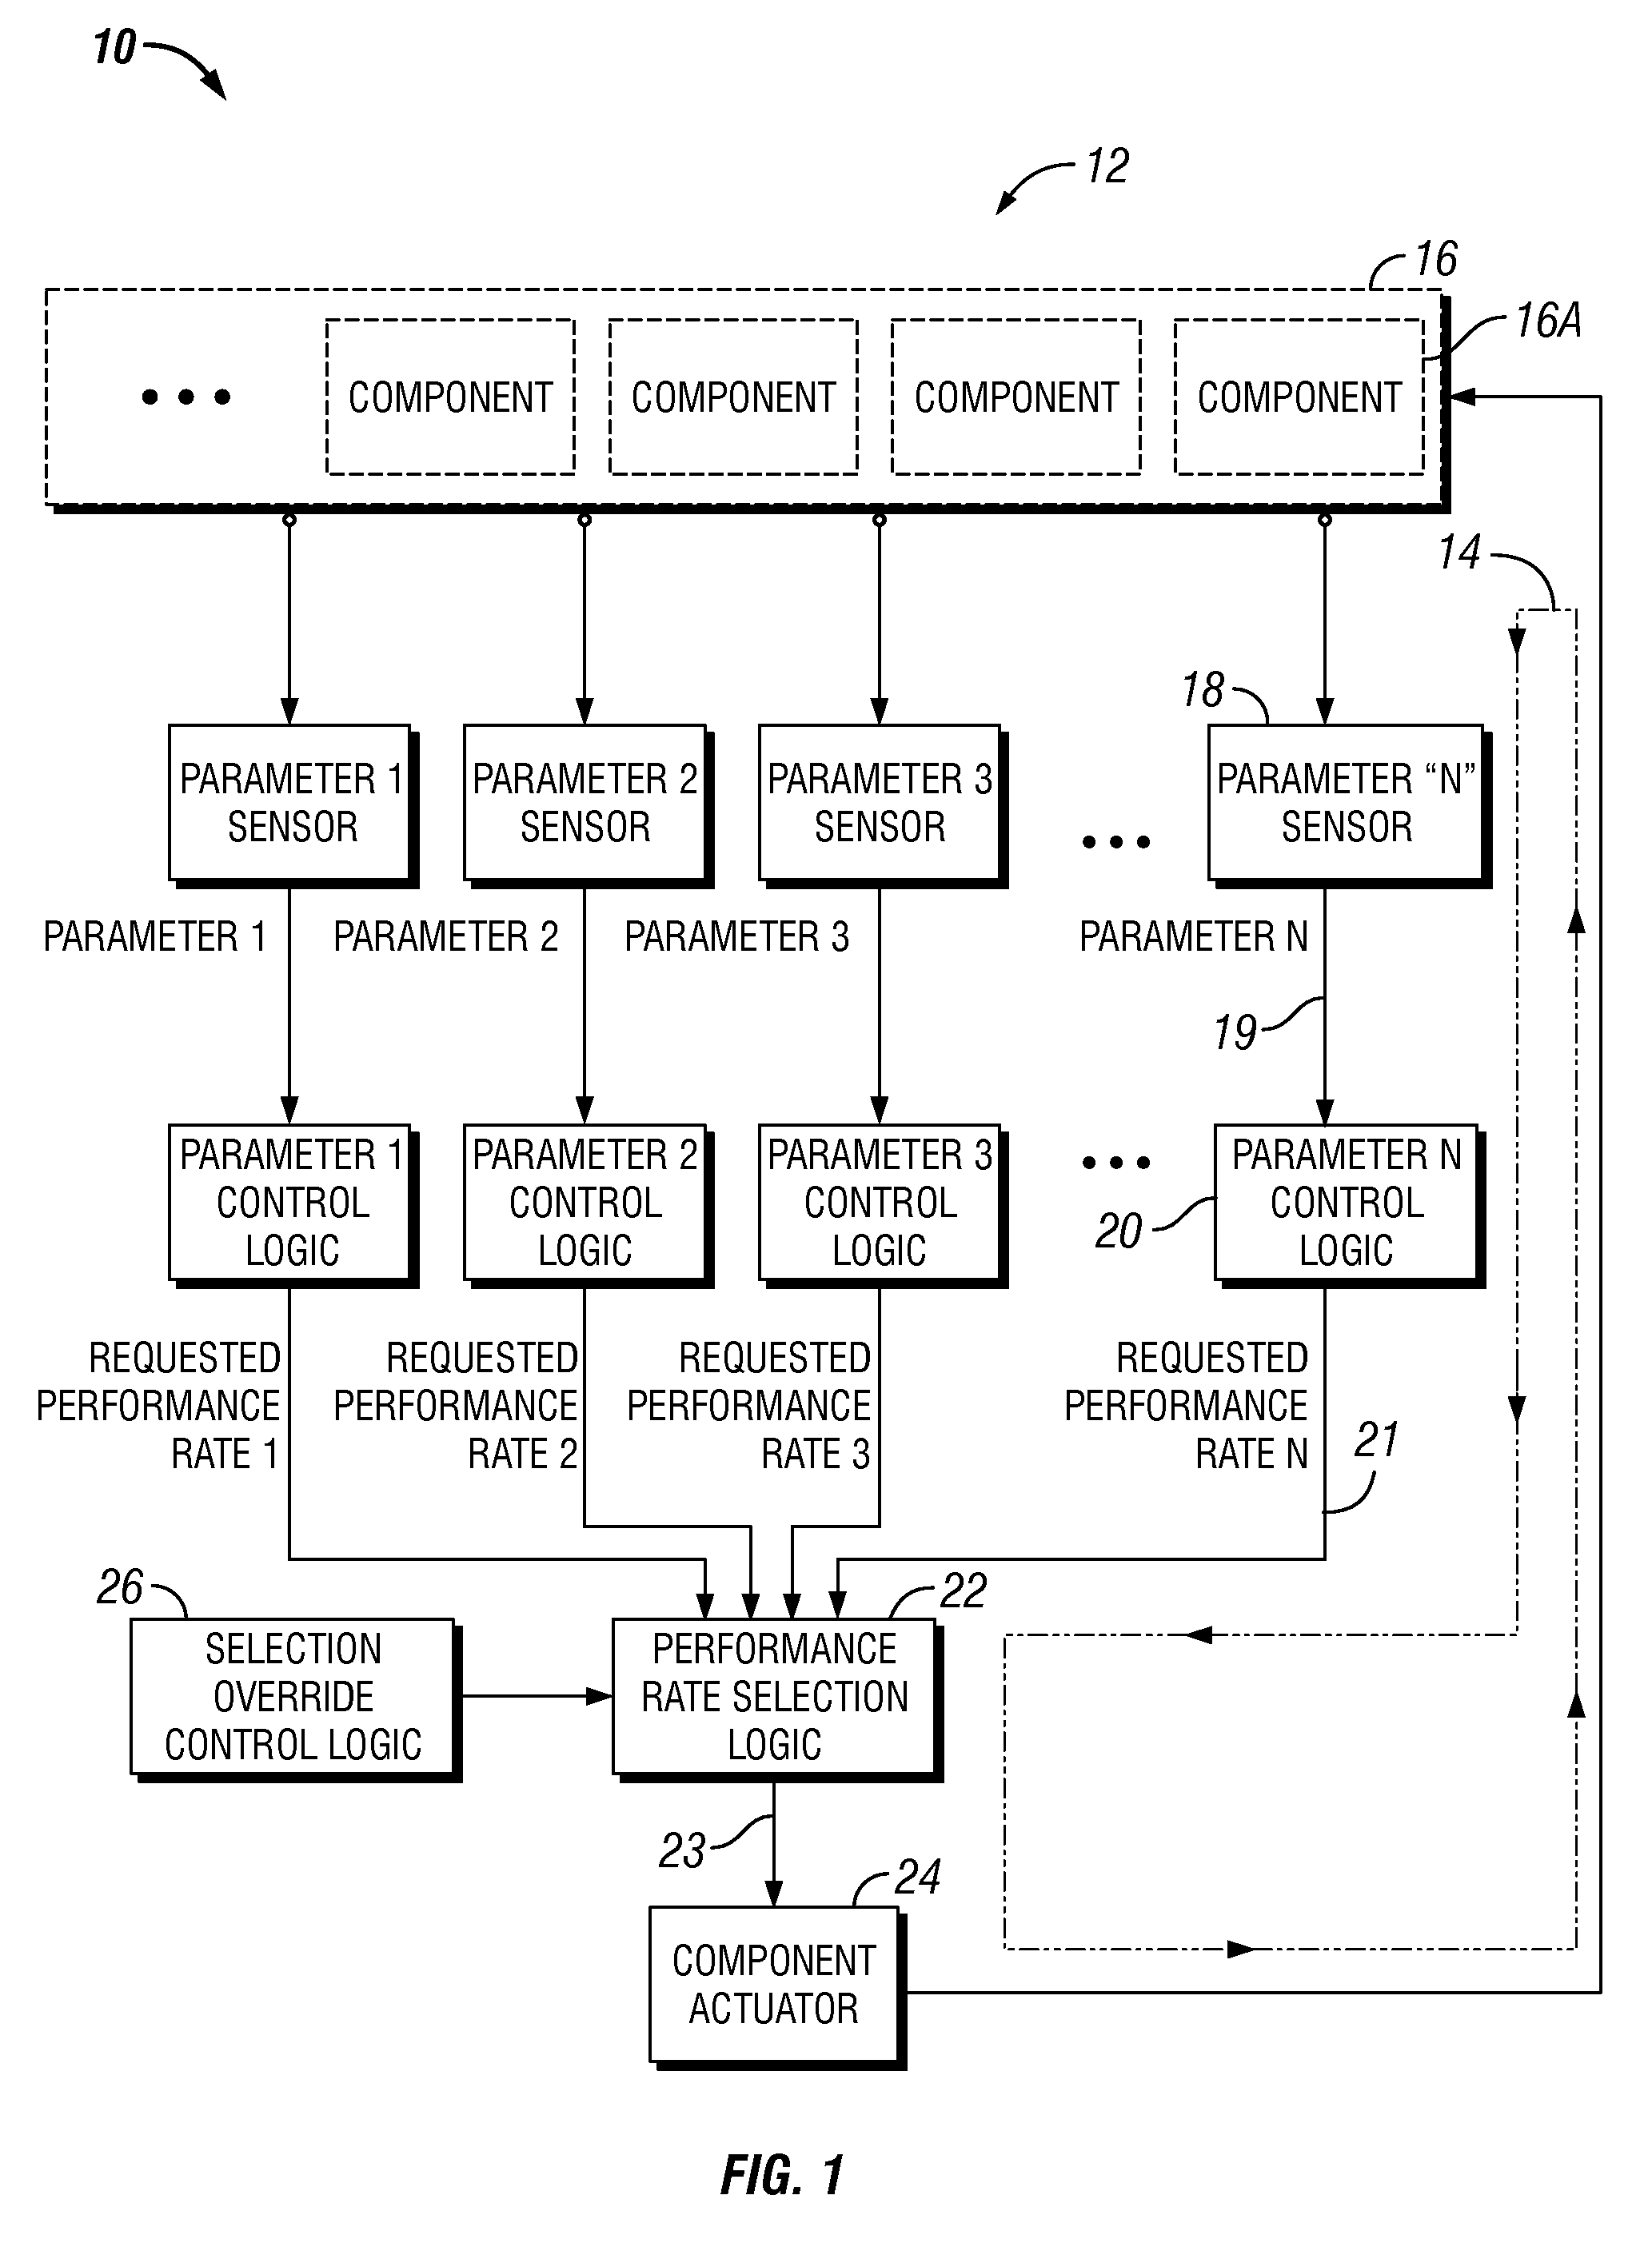 Control systems and method using a shared component actuator